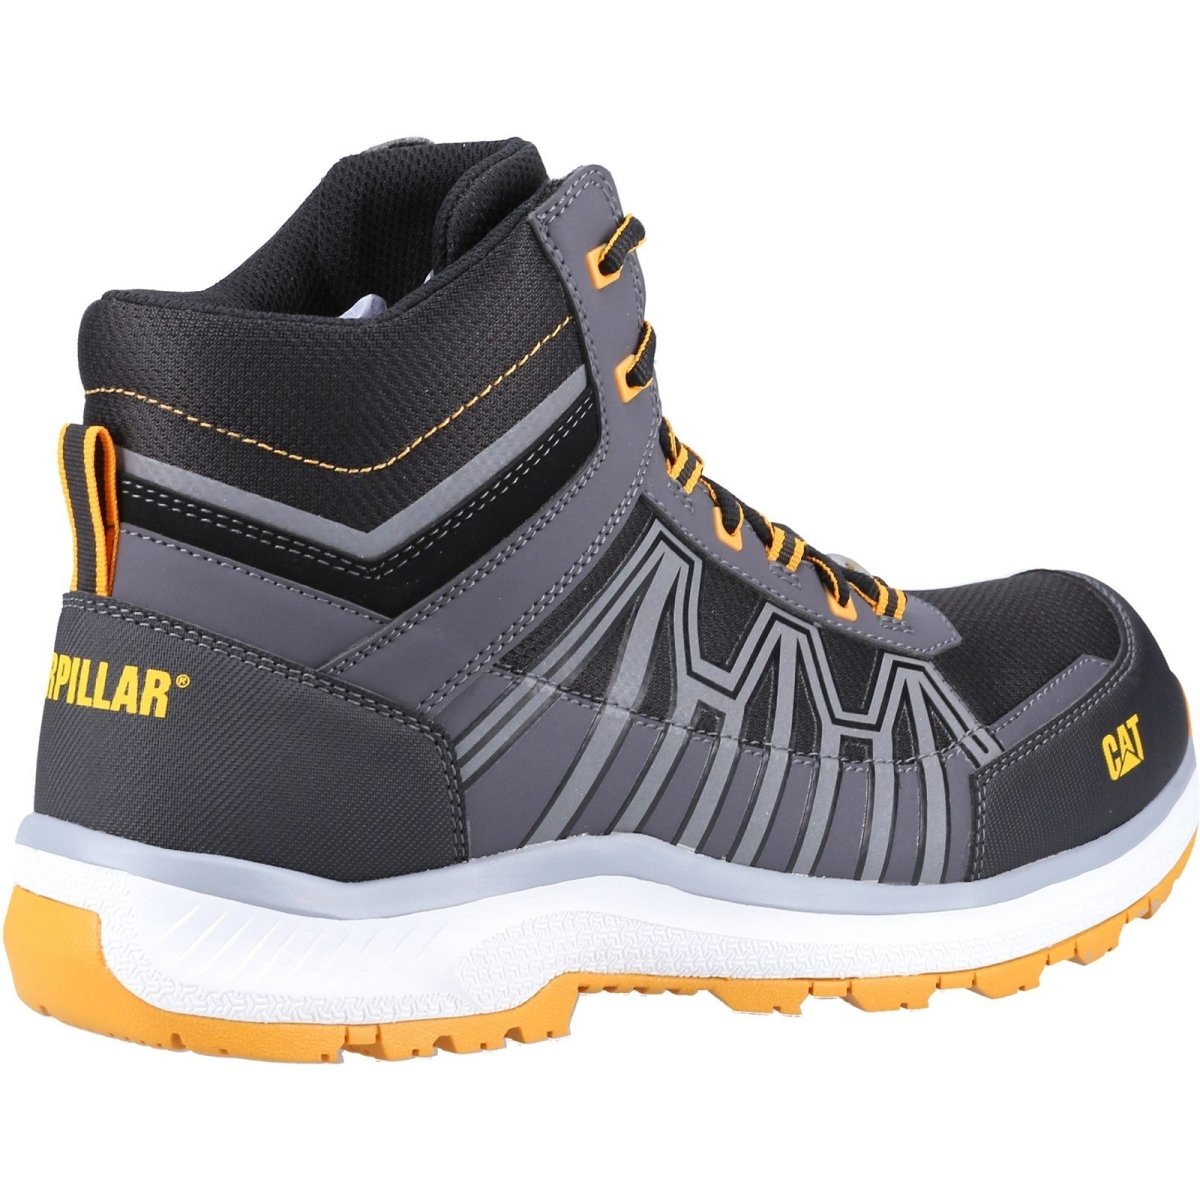 Caterpillar Charge Mid S3 Composite Toe Safety Hiker Boots - Shoe Store Direct